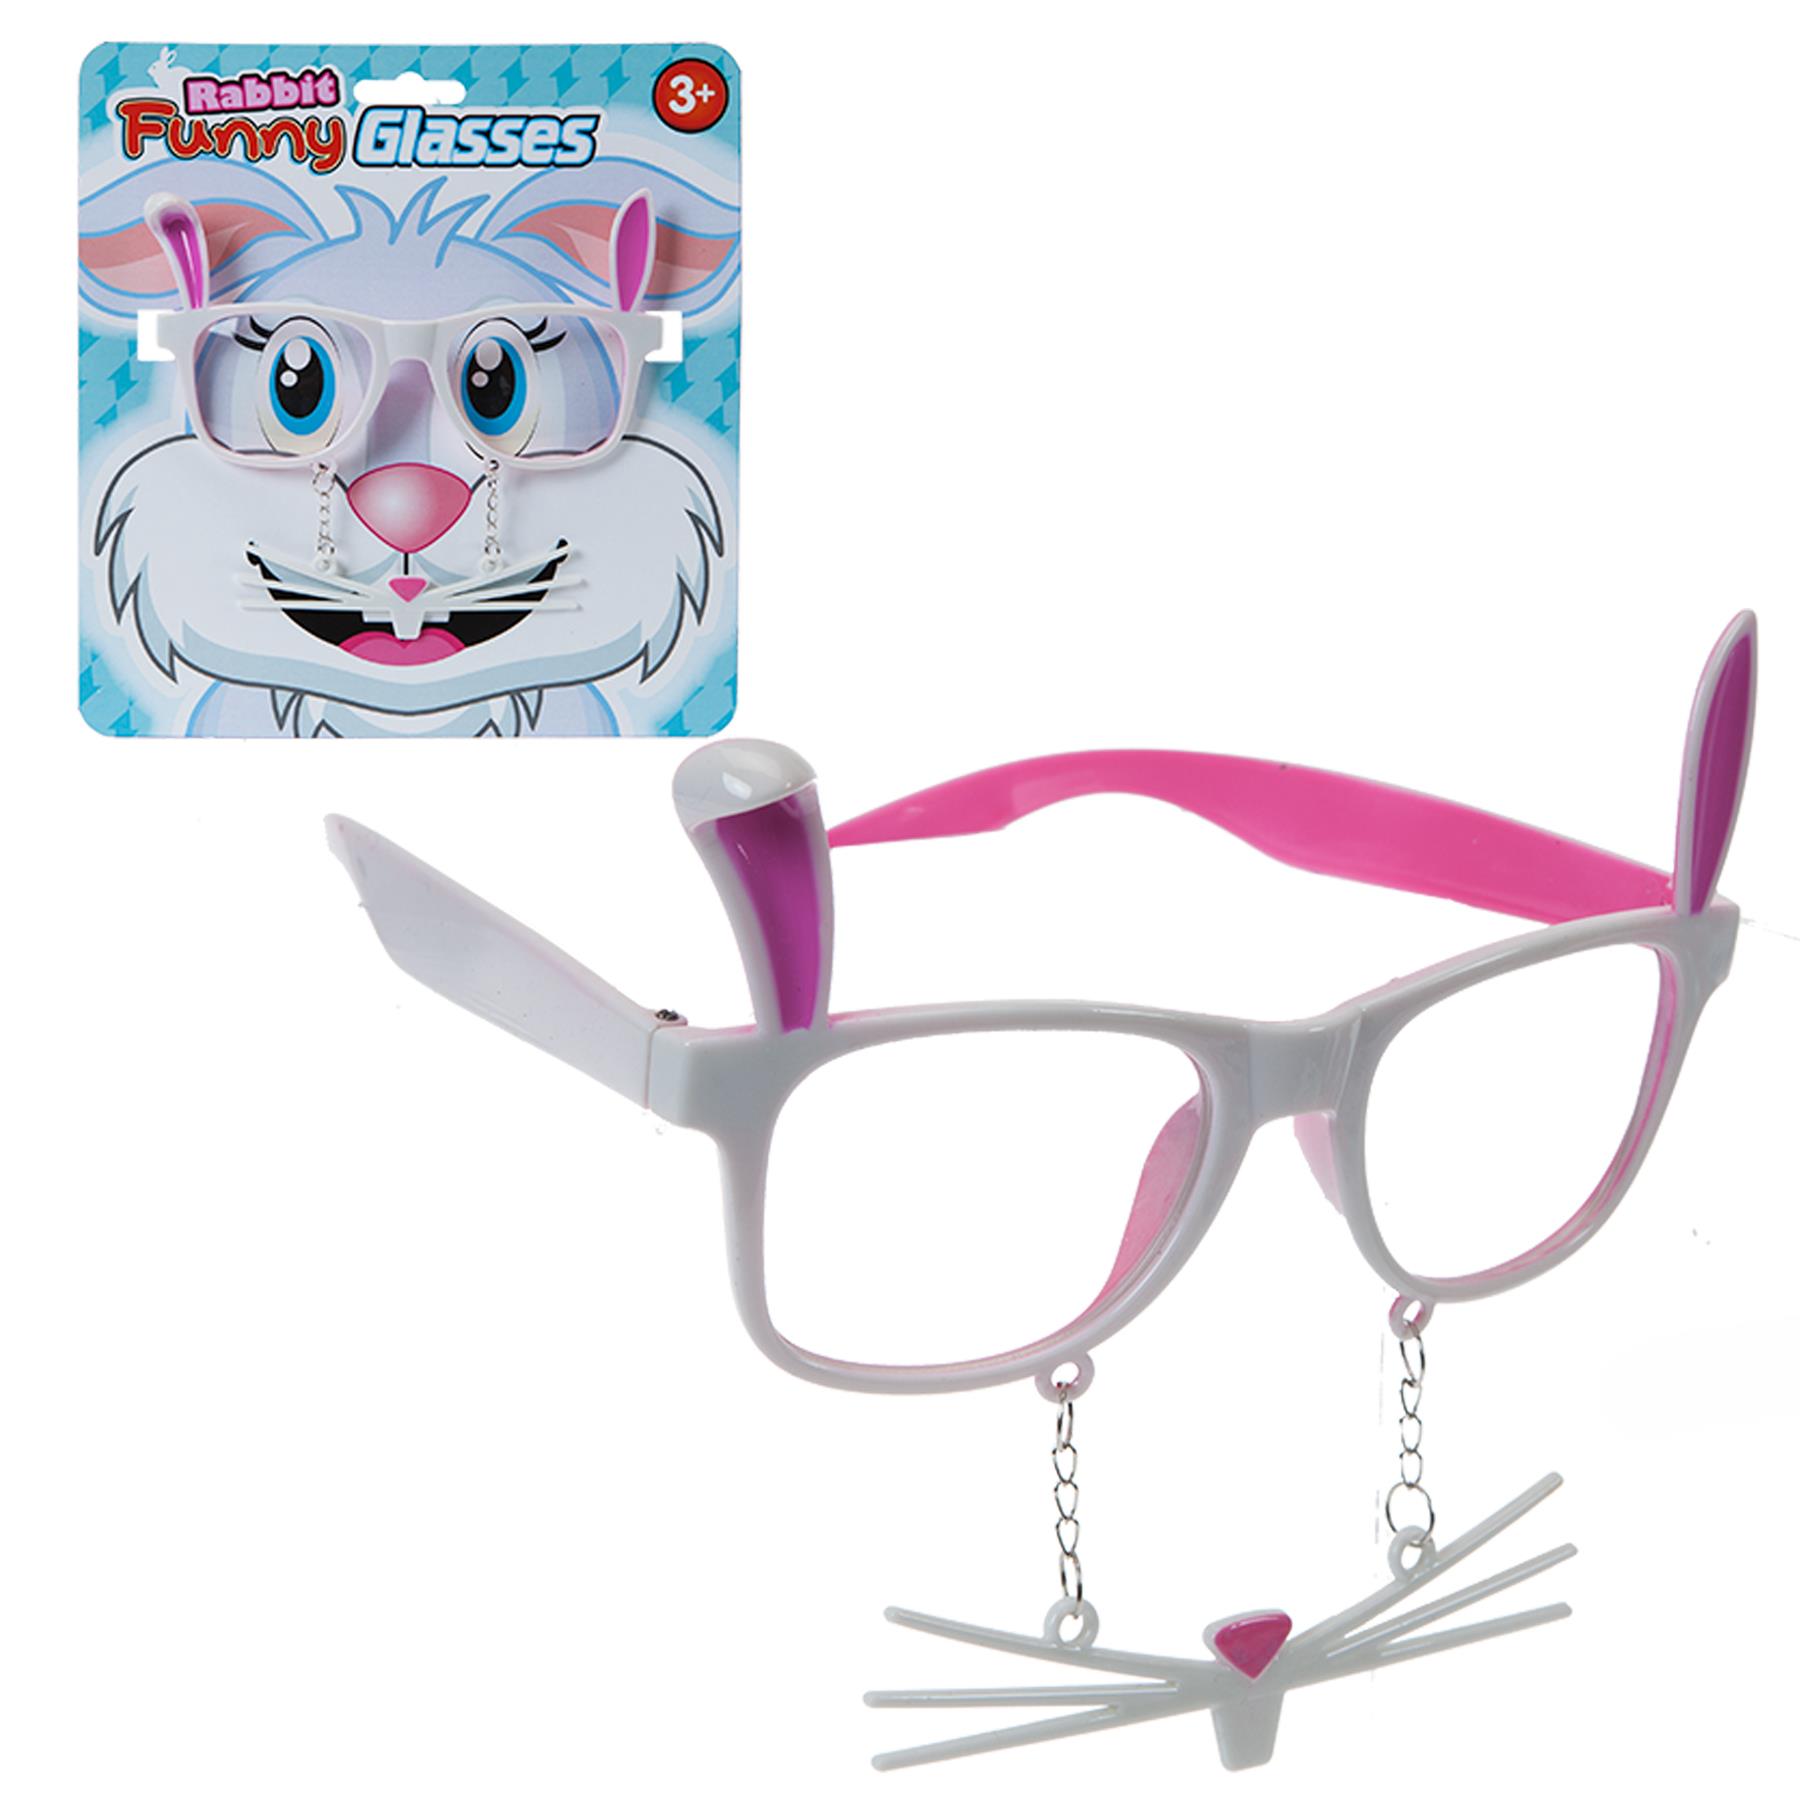 Easter Dressing up Novelty Bunny Rabbit Glasses with Whiskers